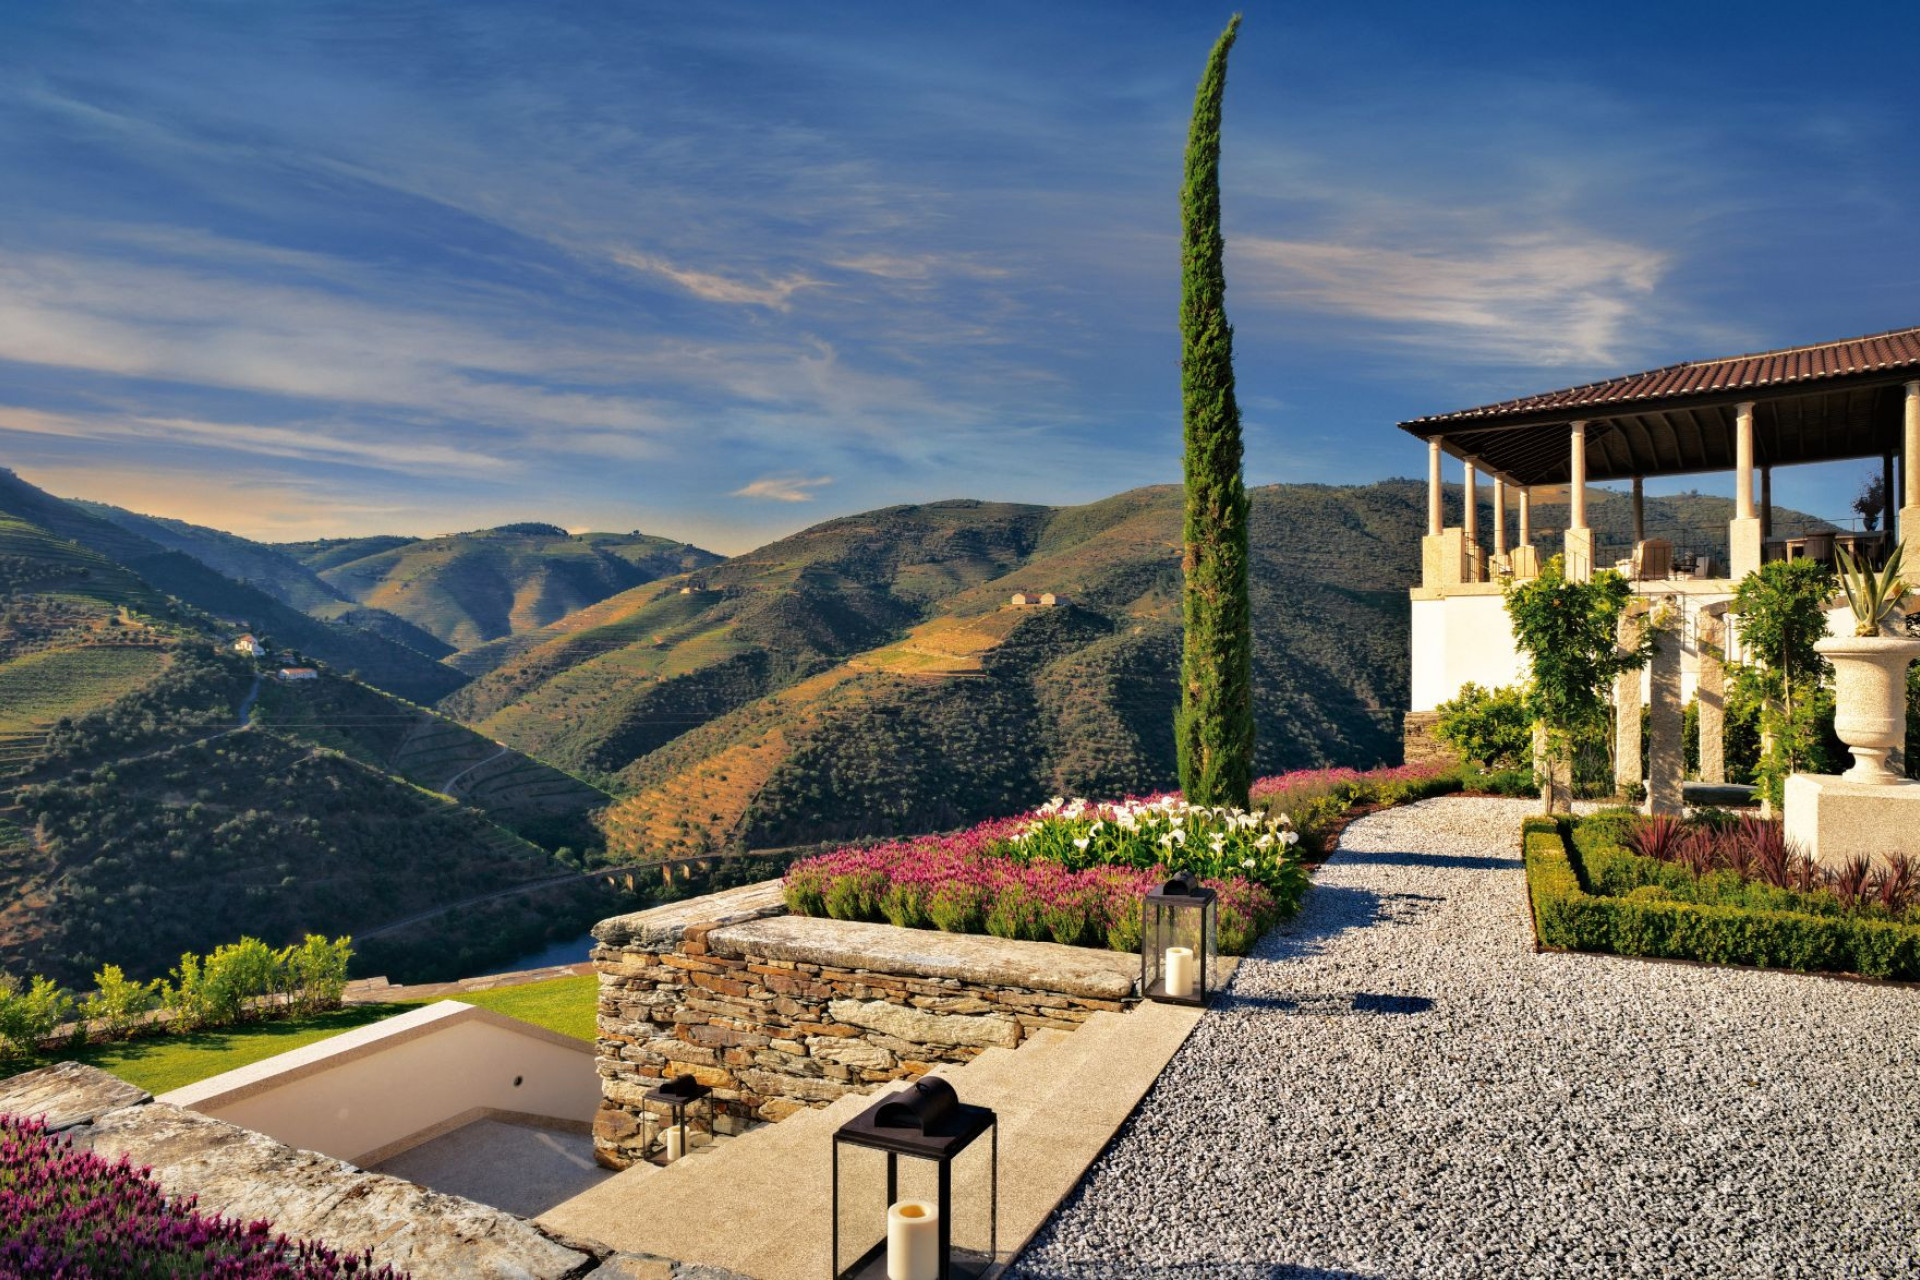 Dreaming of the Douro Valley: the best wine-tasting experiences to try this autumn